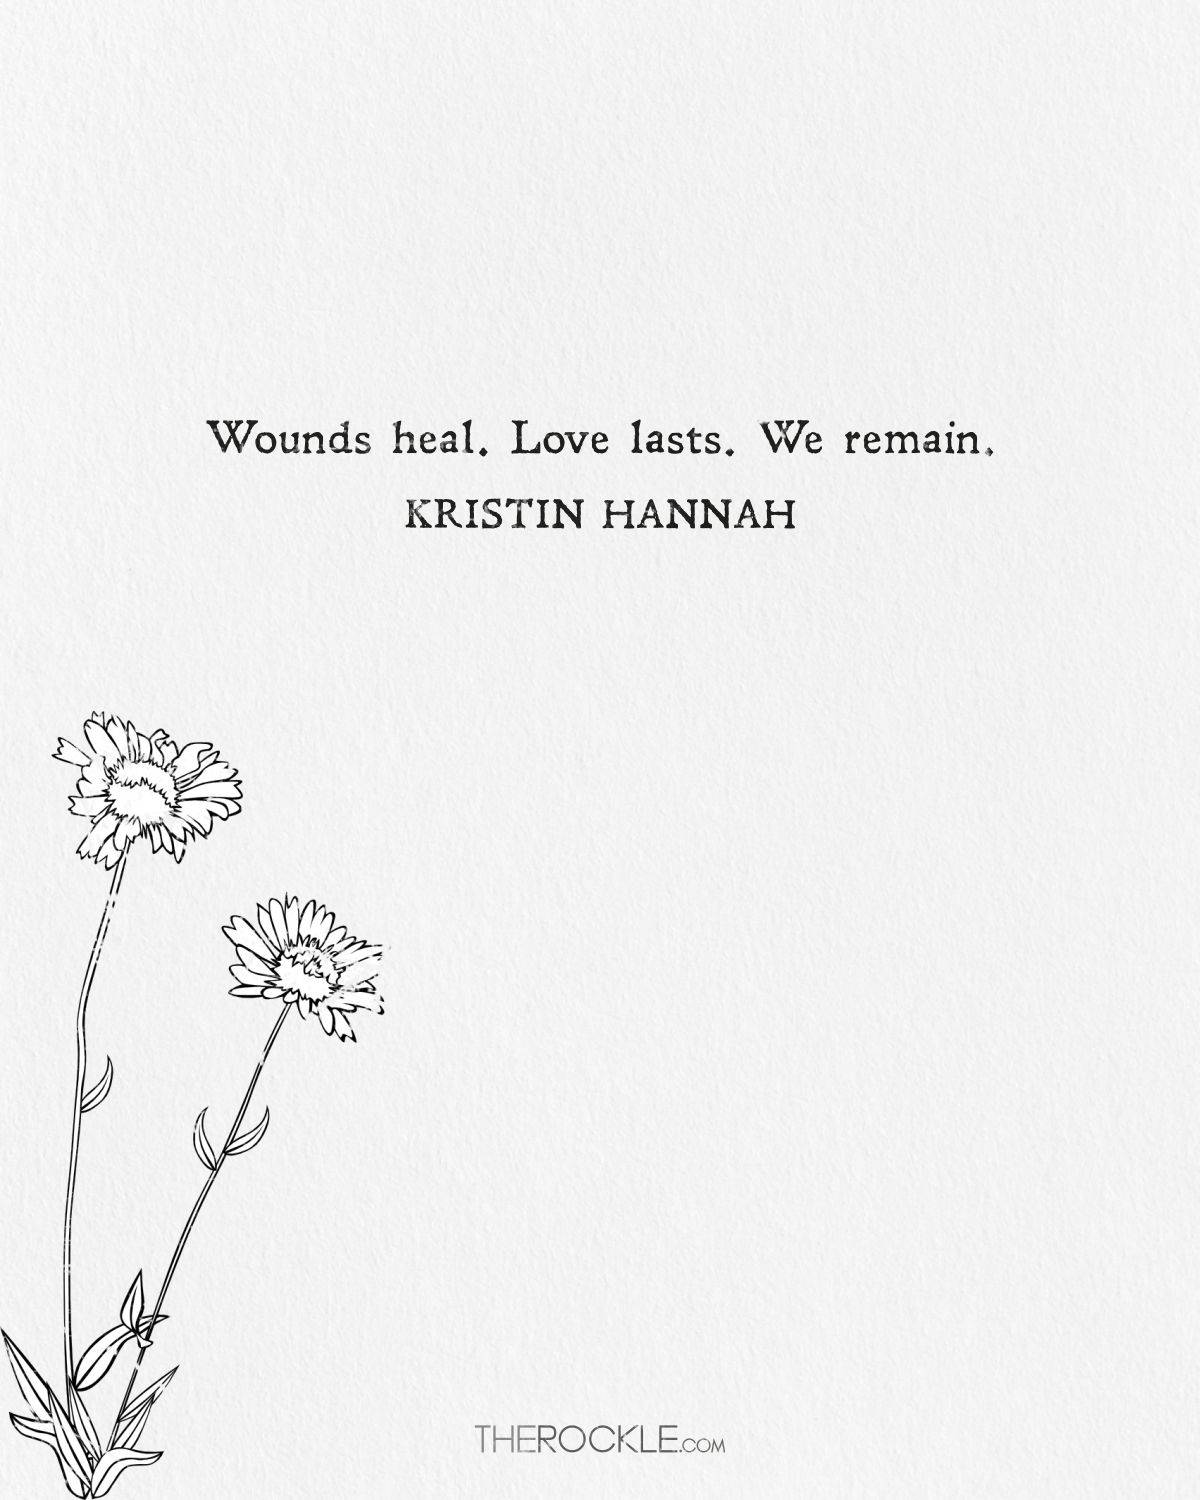 Kristin Hannah's short quote about love